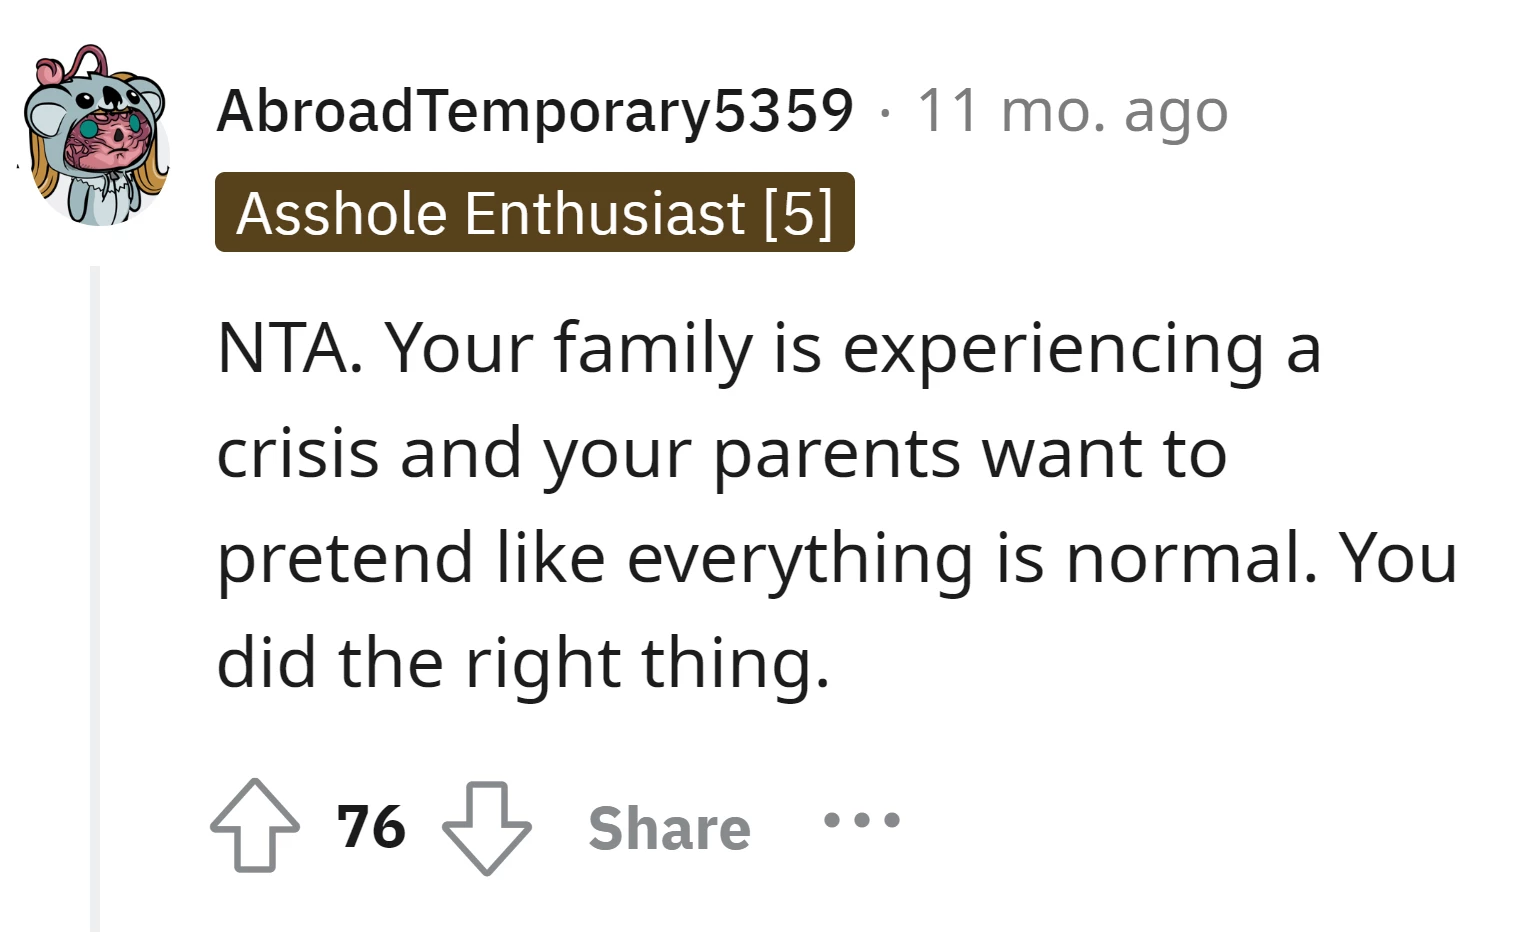 AbroadTemporary5359's comment